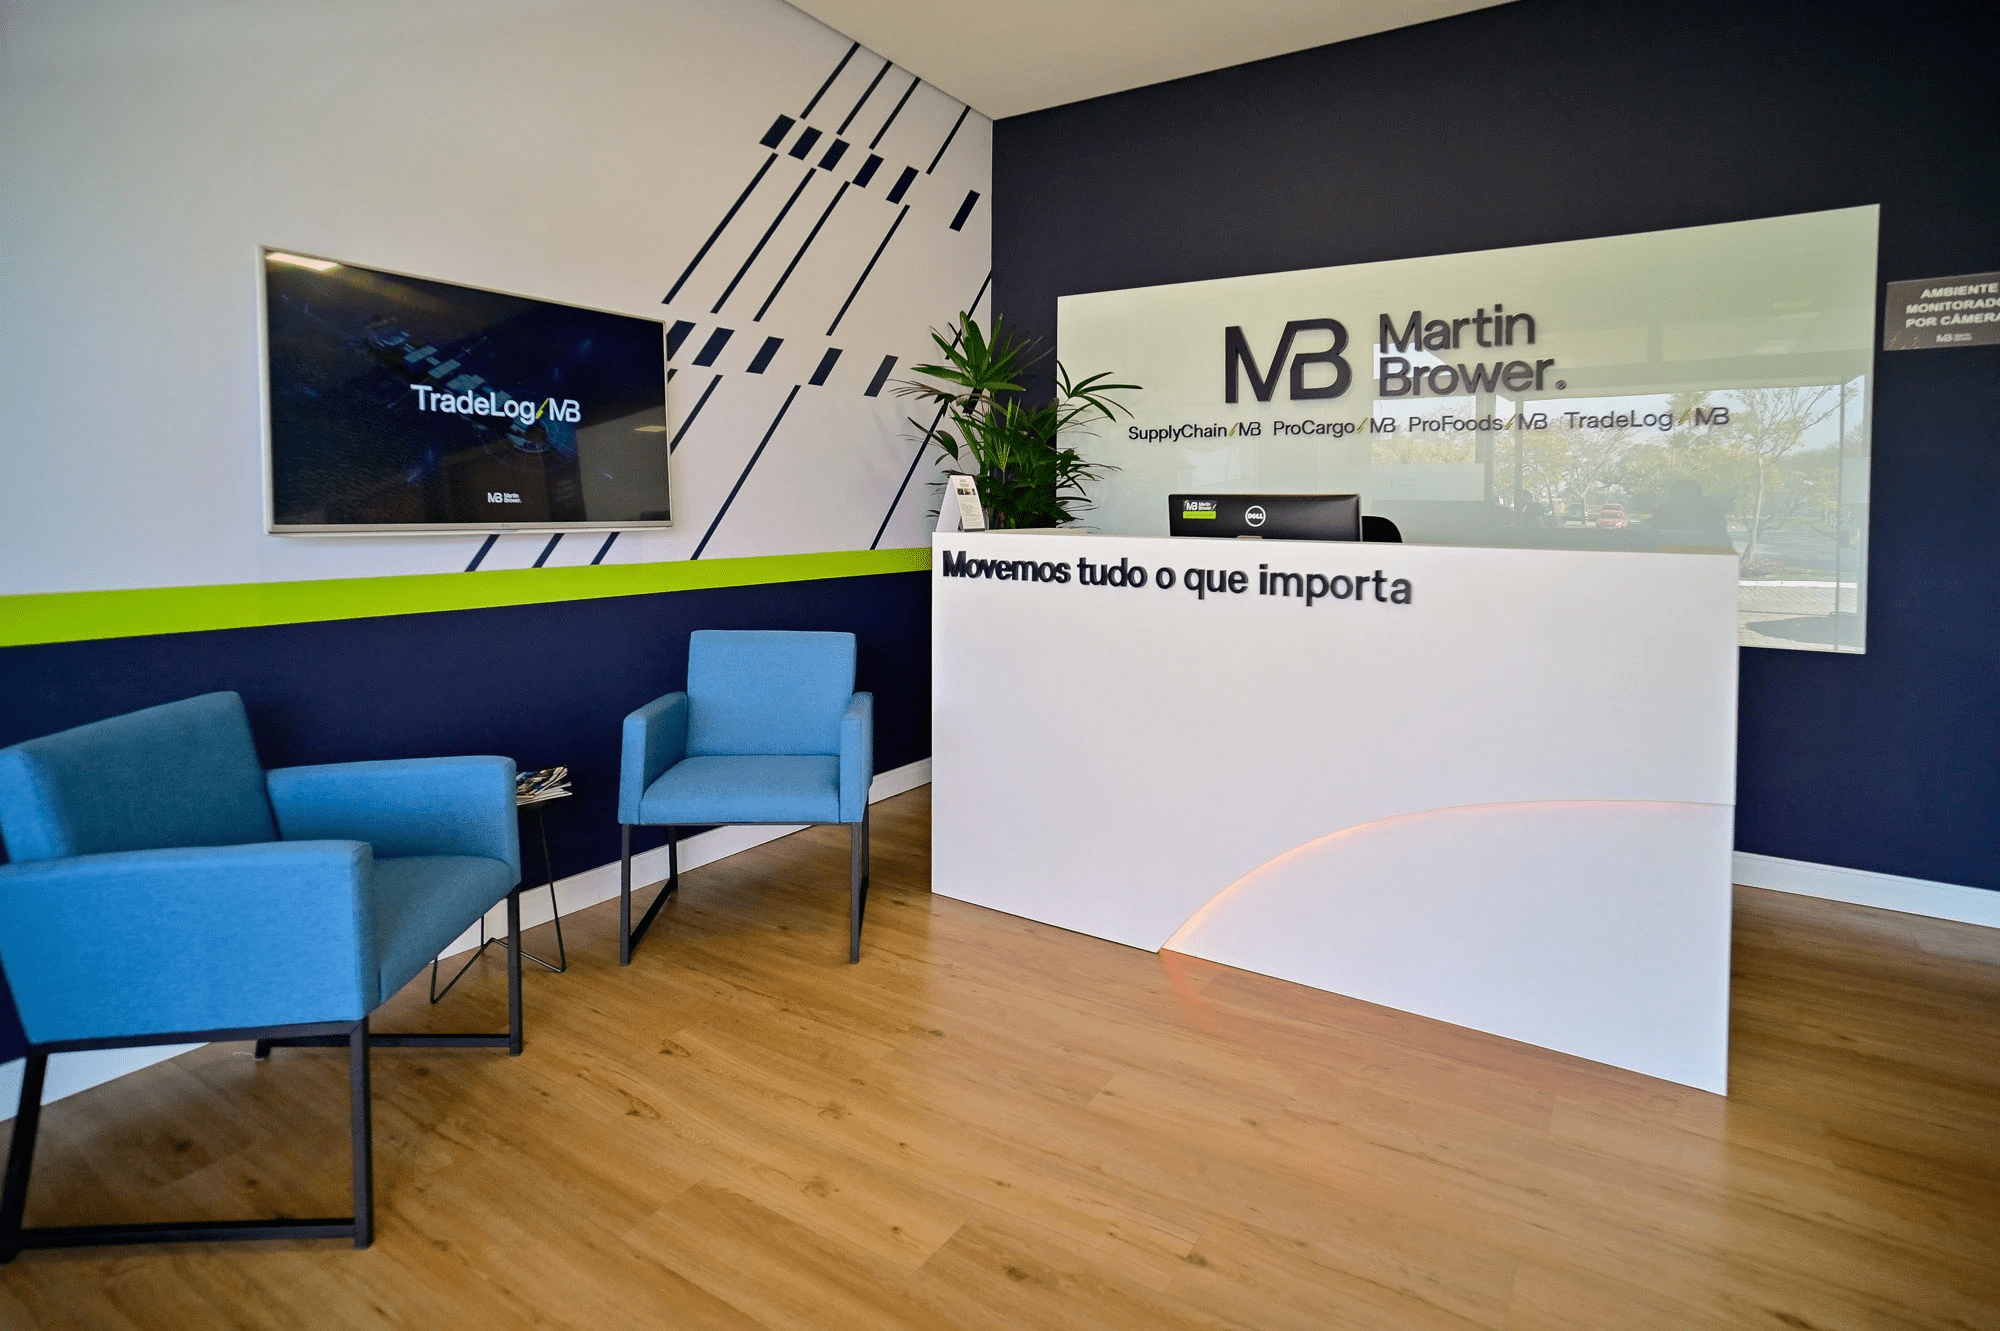 Reception area at the entrance to the production facility. White and blue walls with a green stripe in the center, a TV on the side displaying information about MB Brazil, and a reception desk in the center by the wall